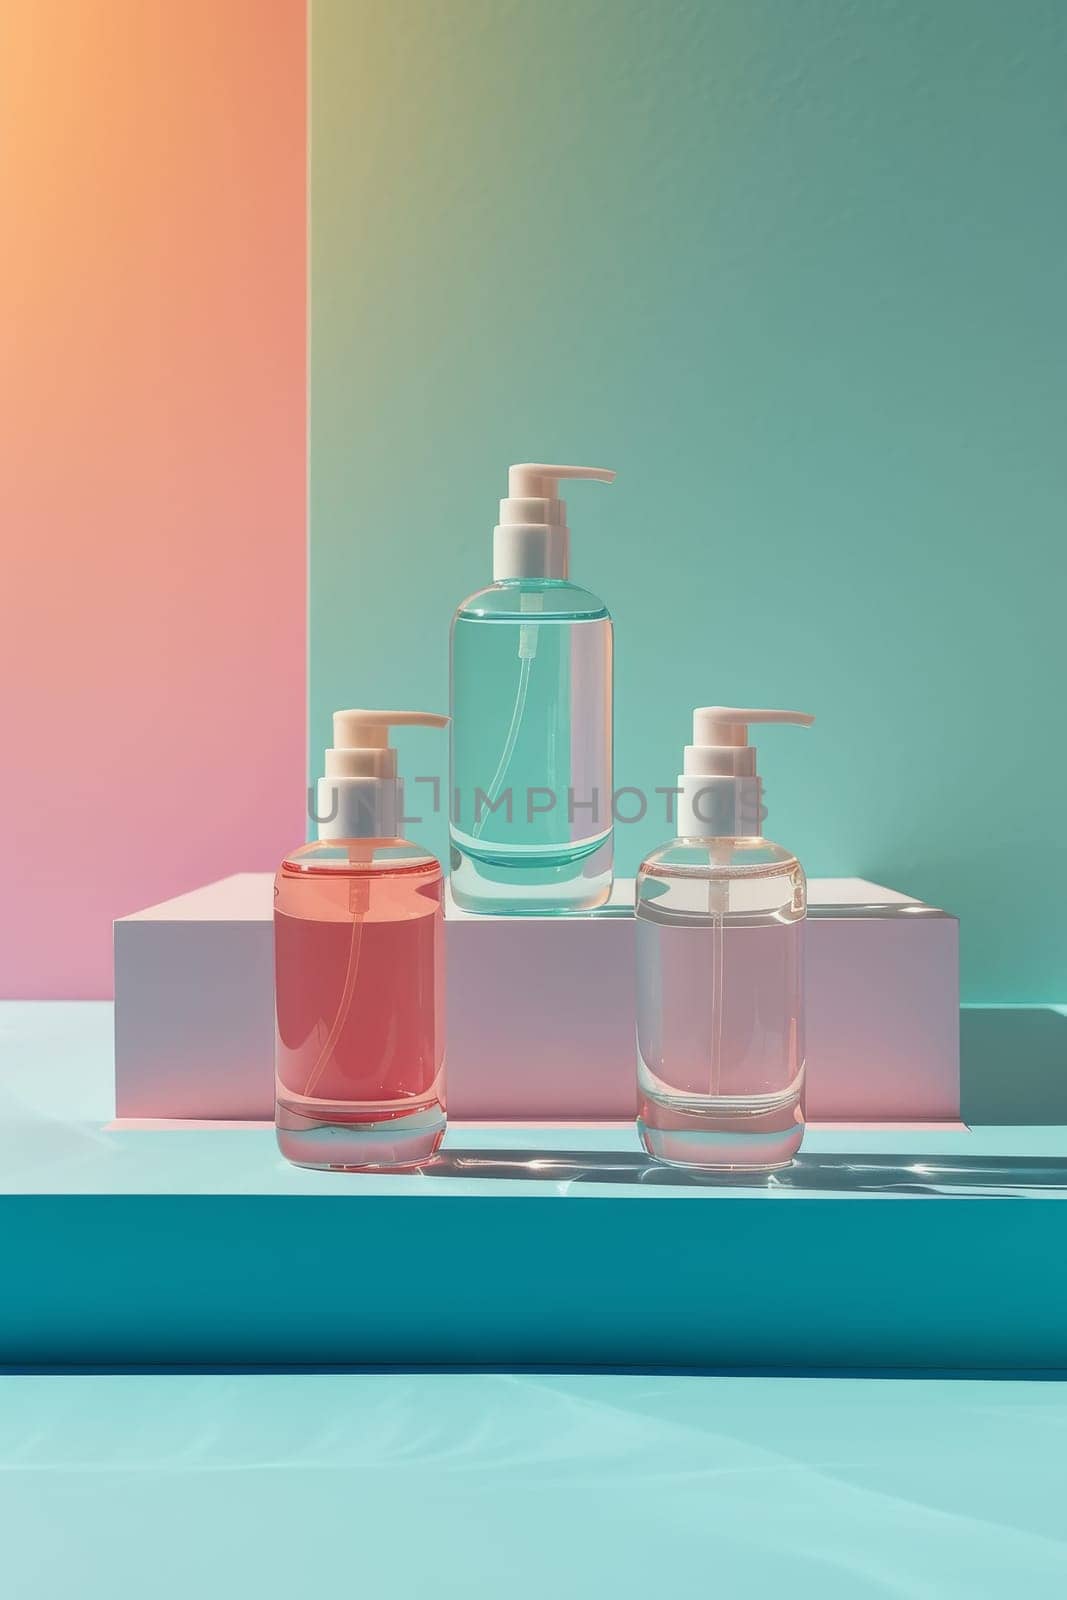 Three bottles of perfume are displayed on a white table, with the person's hands holding them. The bottles are of different colors and sizes, and the scene conveys a sense of luxury and sophistication